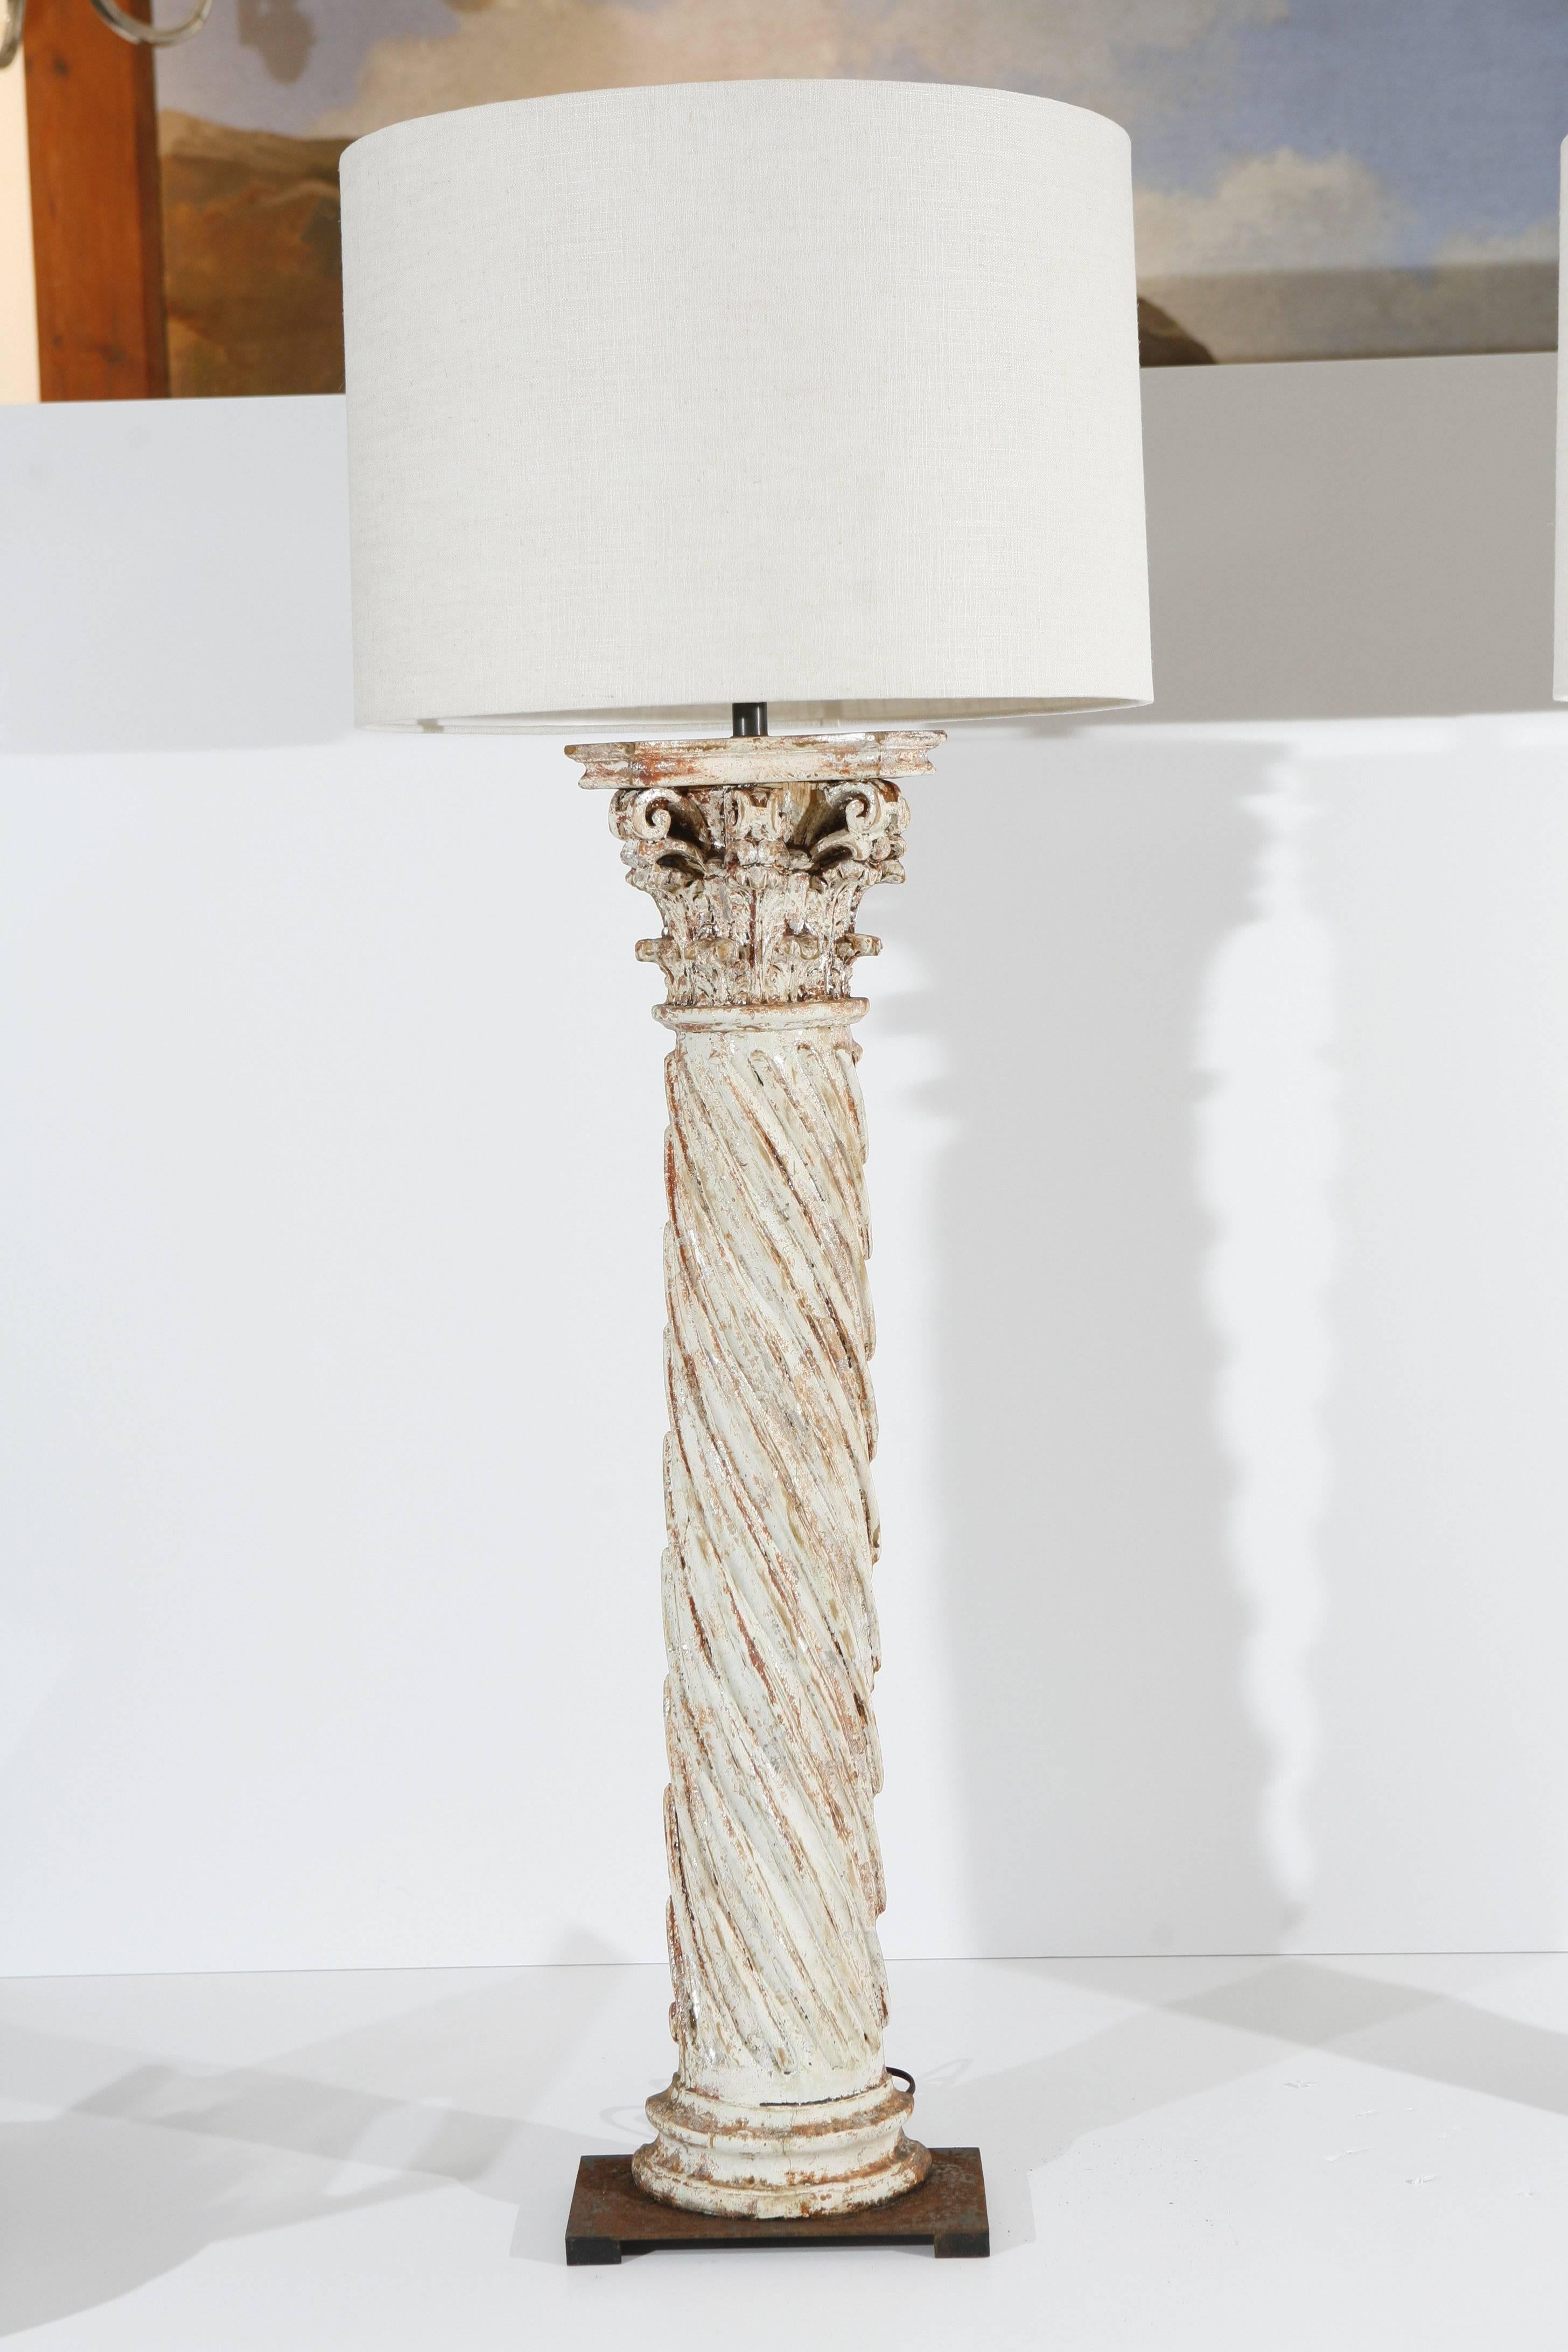 These are a very nice pair of antique hand-painted twist column Lamps.
They sit on a square metal platform base.
The paintwork is original in a off-white colors with some hint of red and silver.
These are all ready to use with the brass light